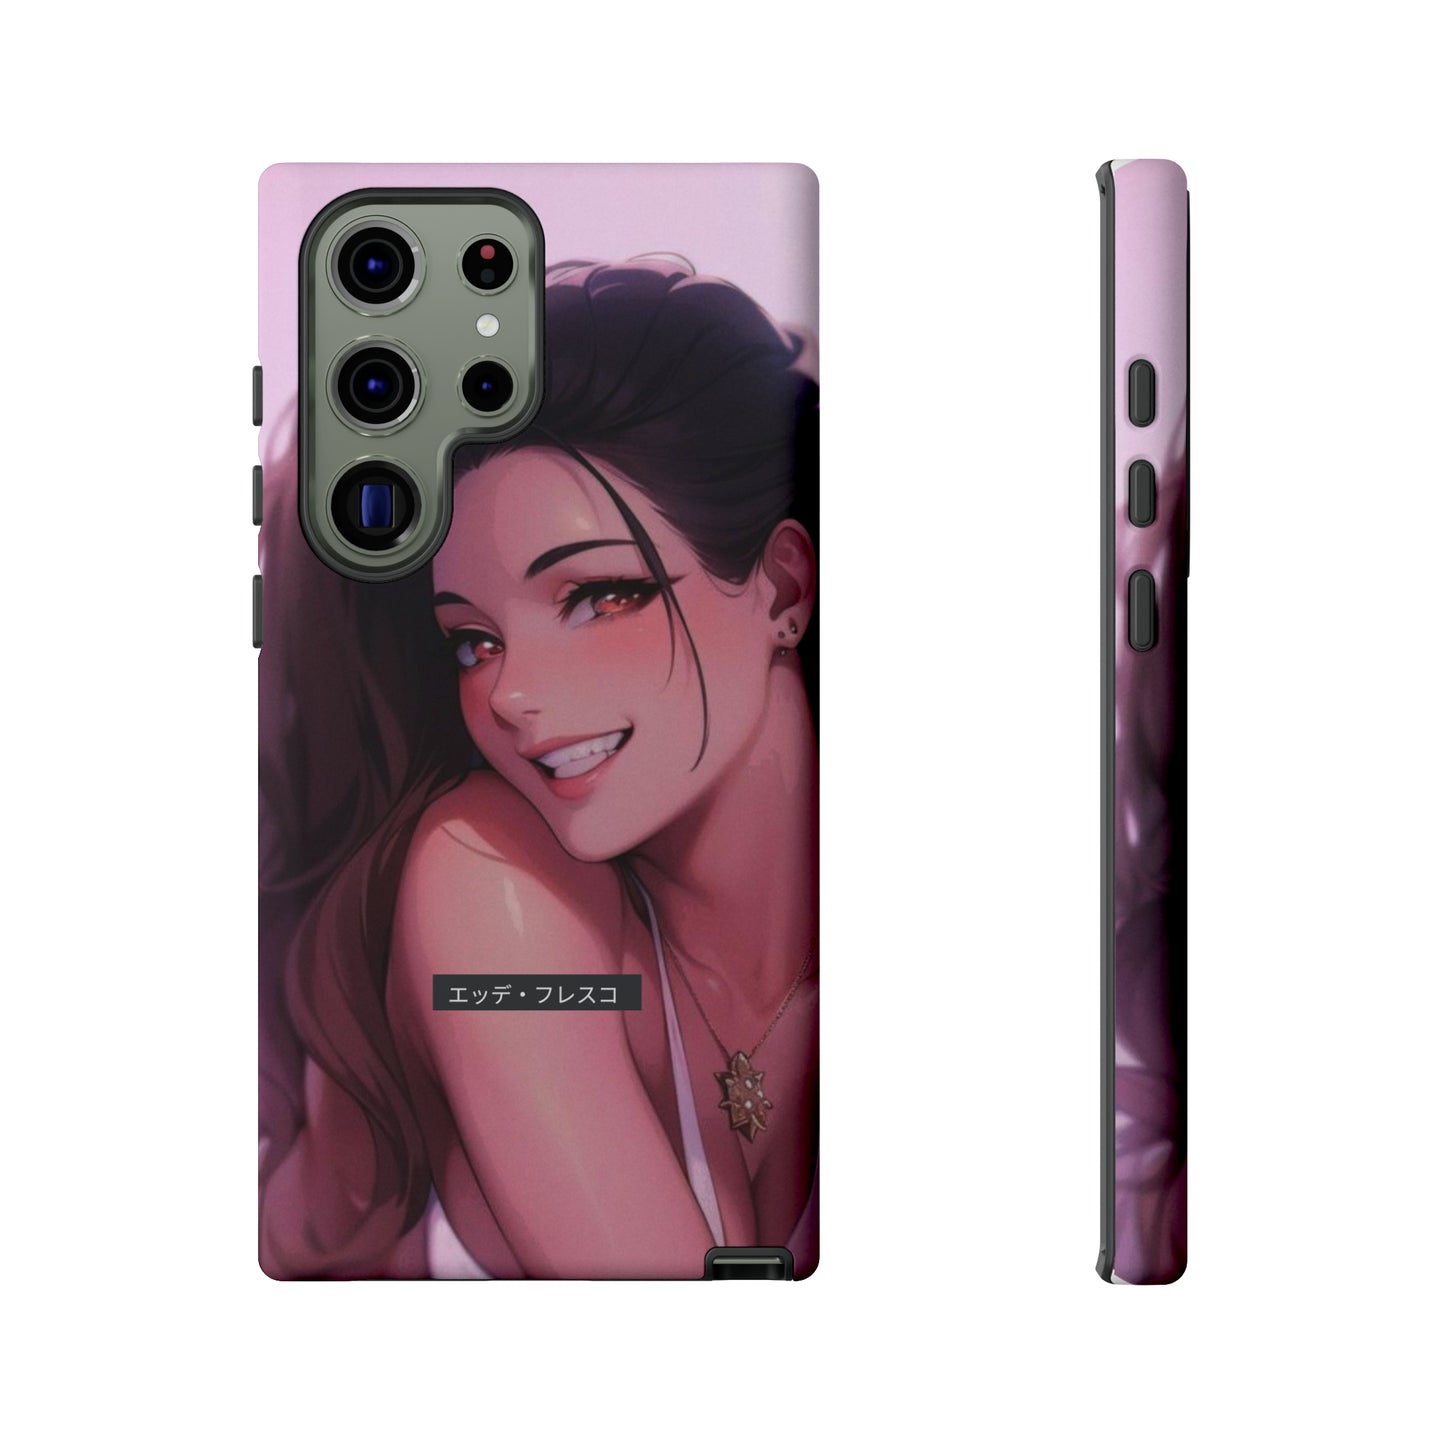 Anime Style Art Tough Cases- "80s Chick"